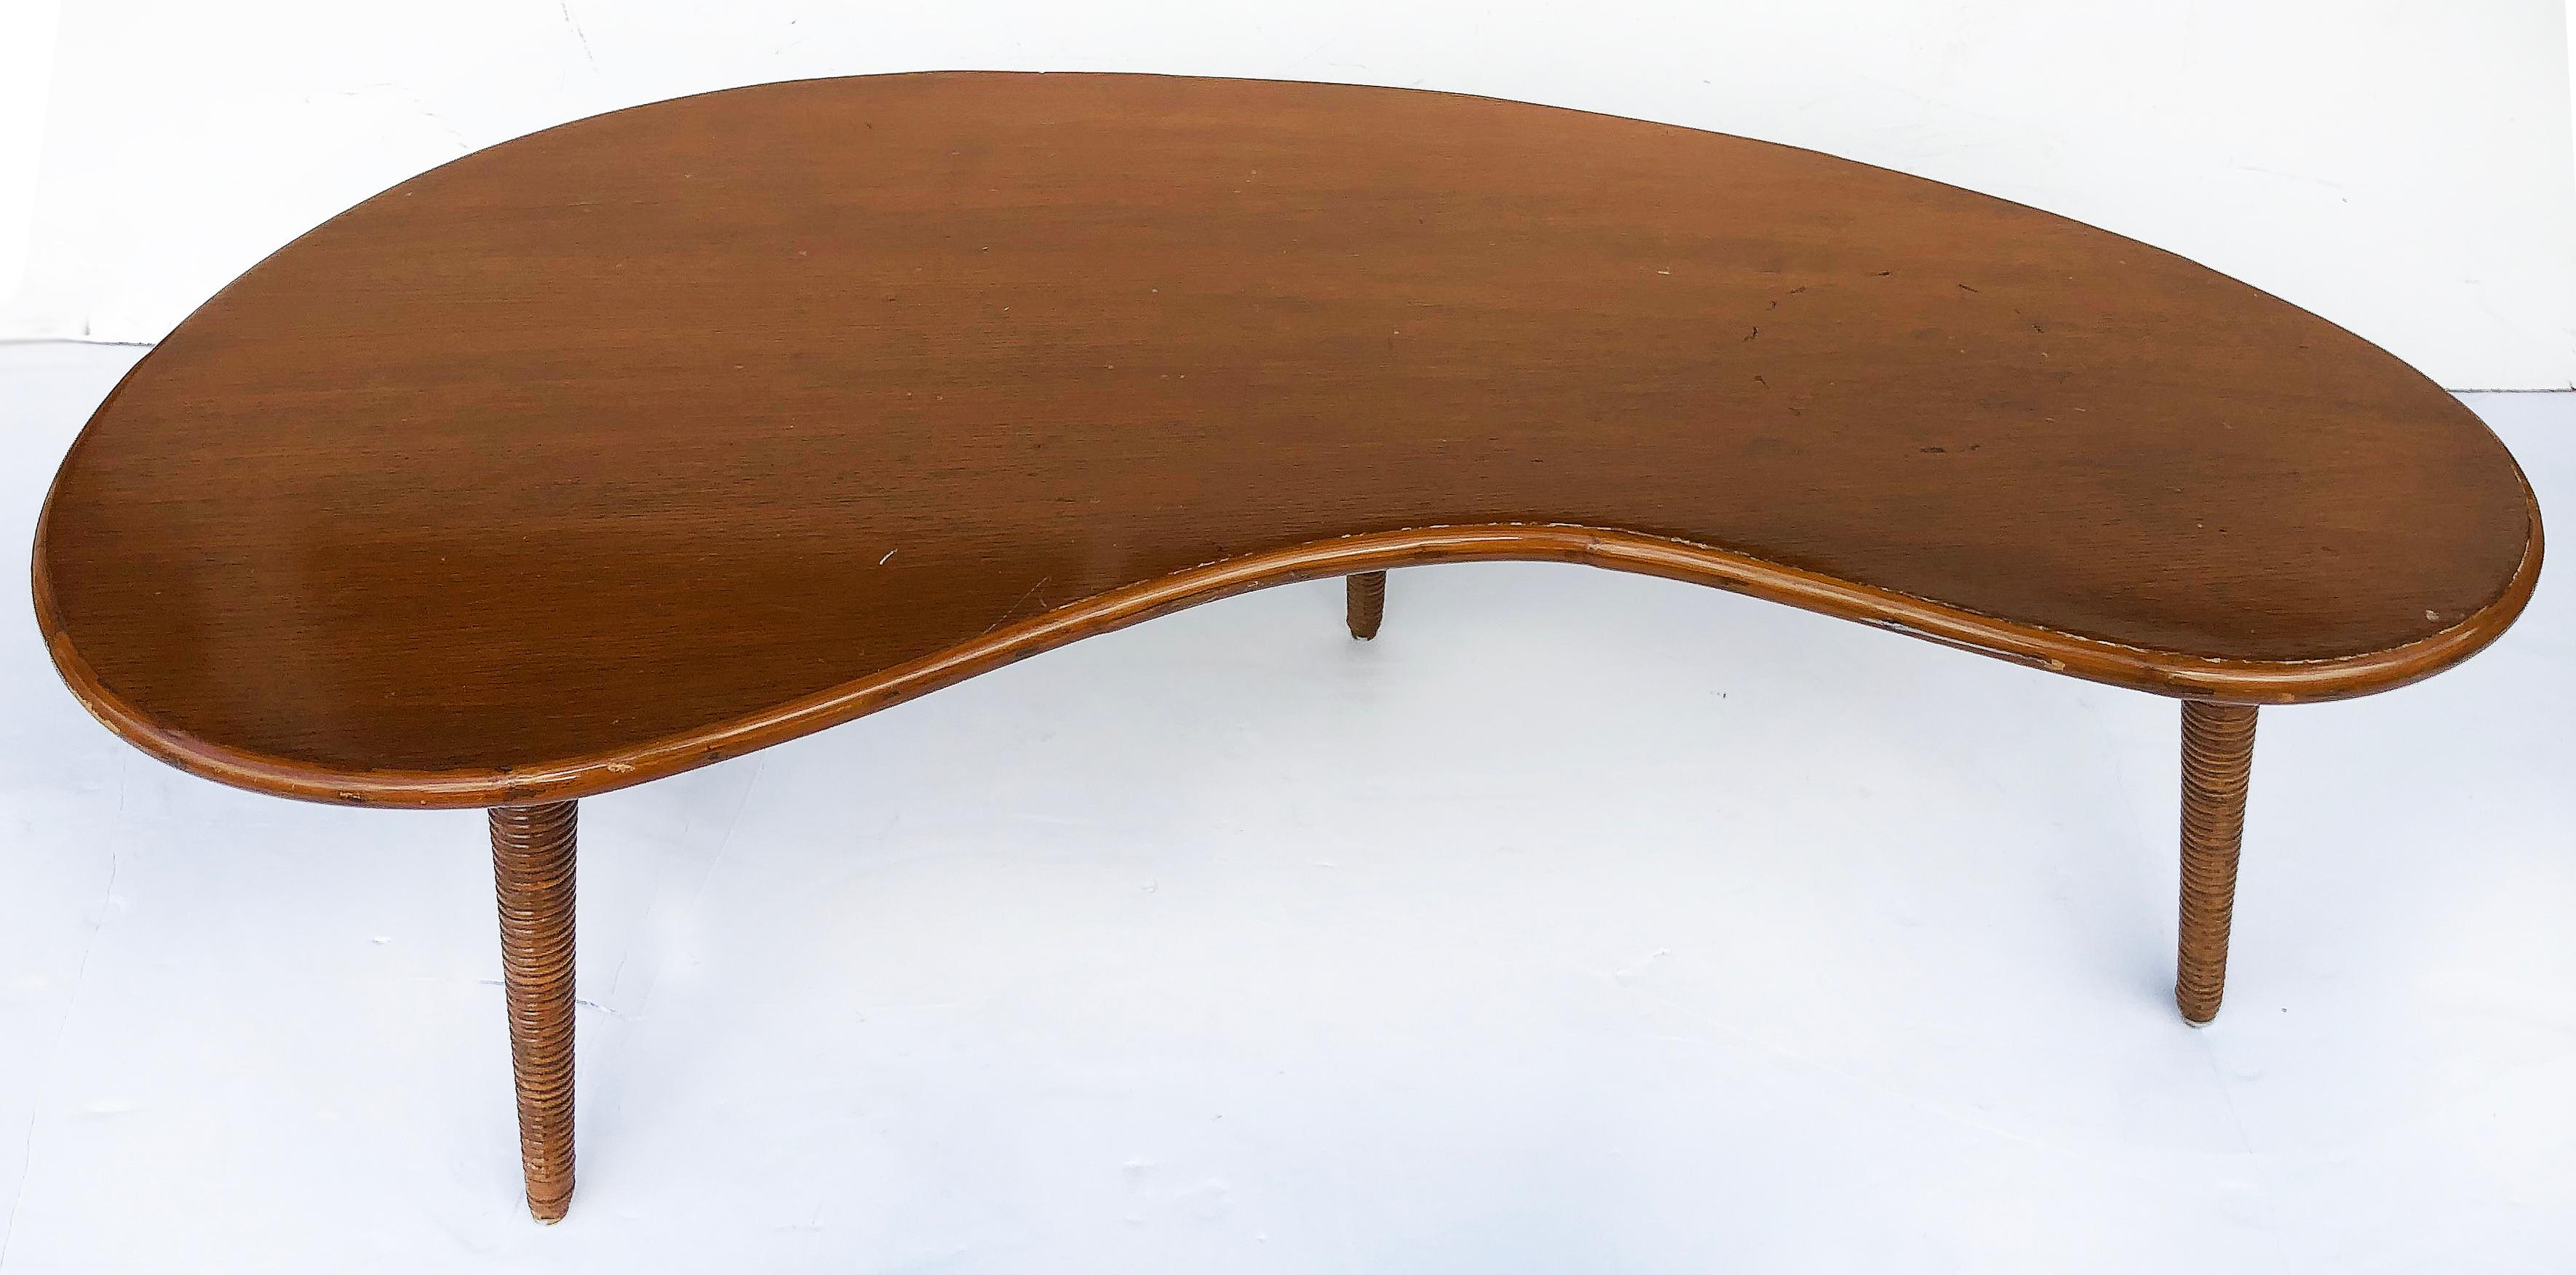 Mid-Century Modern biomorphic shape coffee table with splayed reed legs


Offered is a sinuous 1950s biomorphic form coffee table with tapered splayed legs that have split rattan reed details. The table is in original condition with a vintage